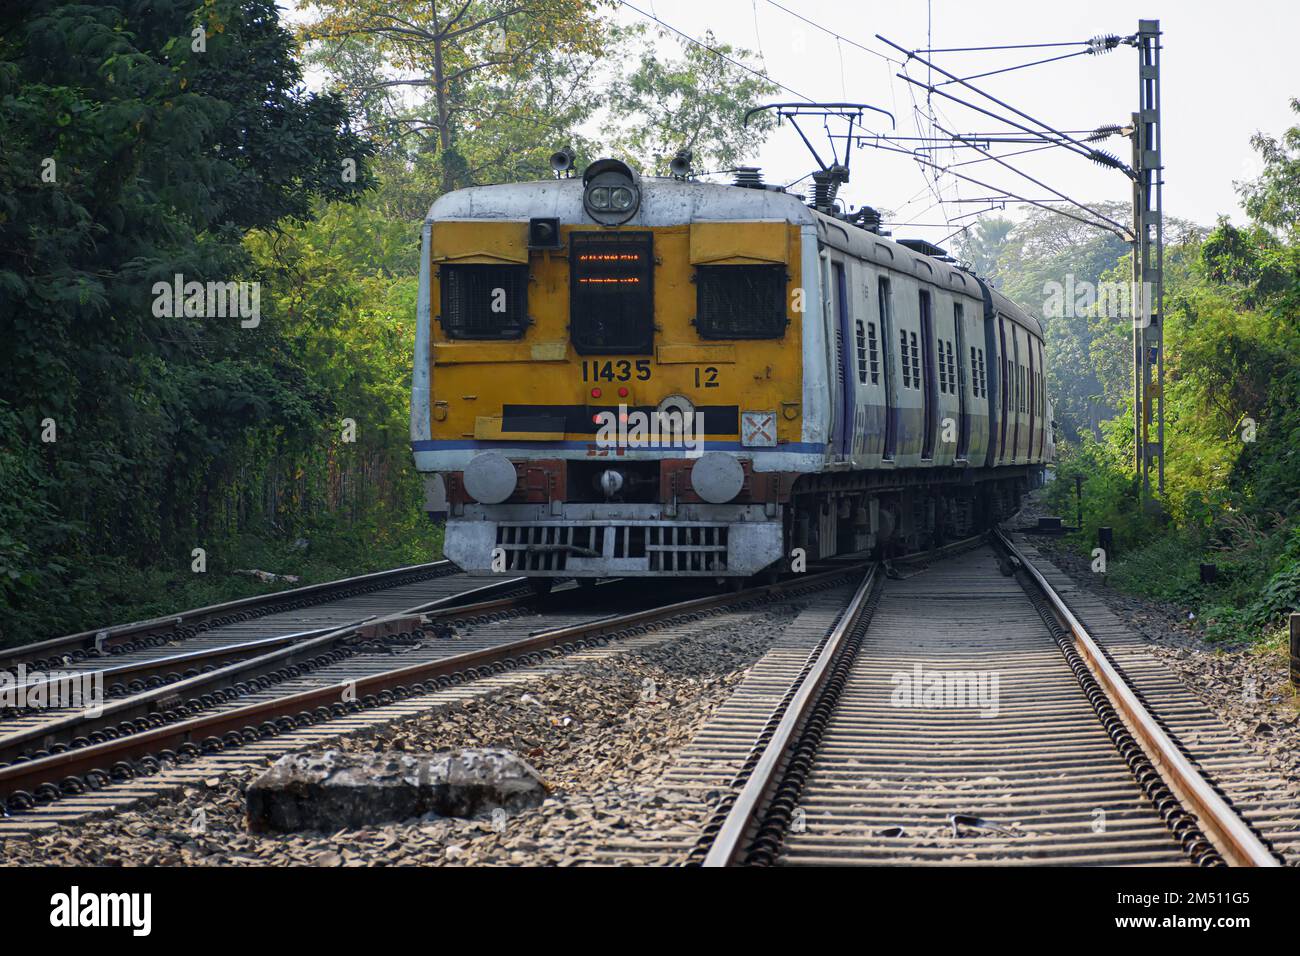 A view of local train of Eastern Railway in Indian Railway system running in city Kolkata, West Bengal, India Stock Photo